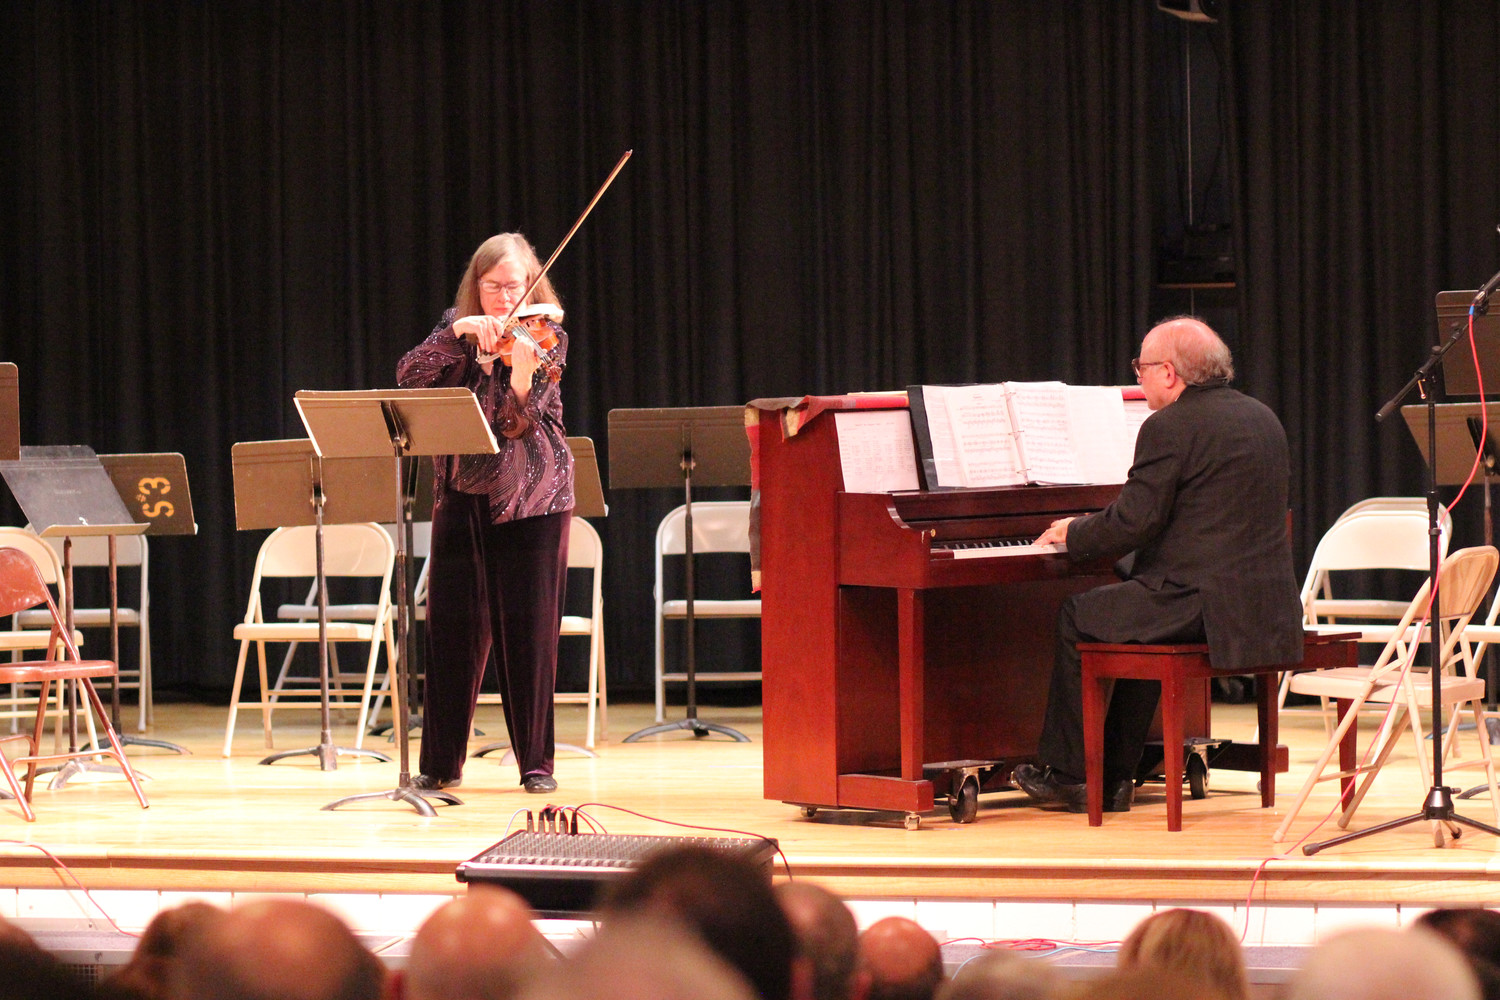 Anne Yarrow commissioned and recorded all 12 of Rothgarber’s pieces for violin and piano and performed a few of them at the concert honoring the composer. Leonard Lehrman accompanied Yarrow on piano.